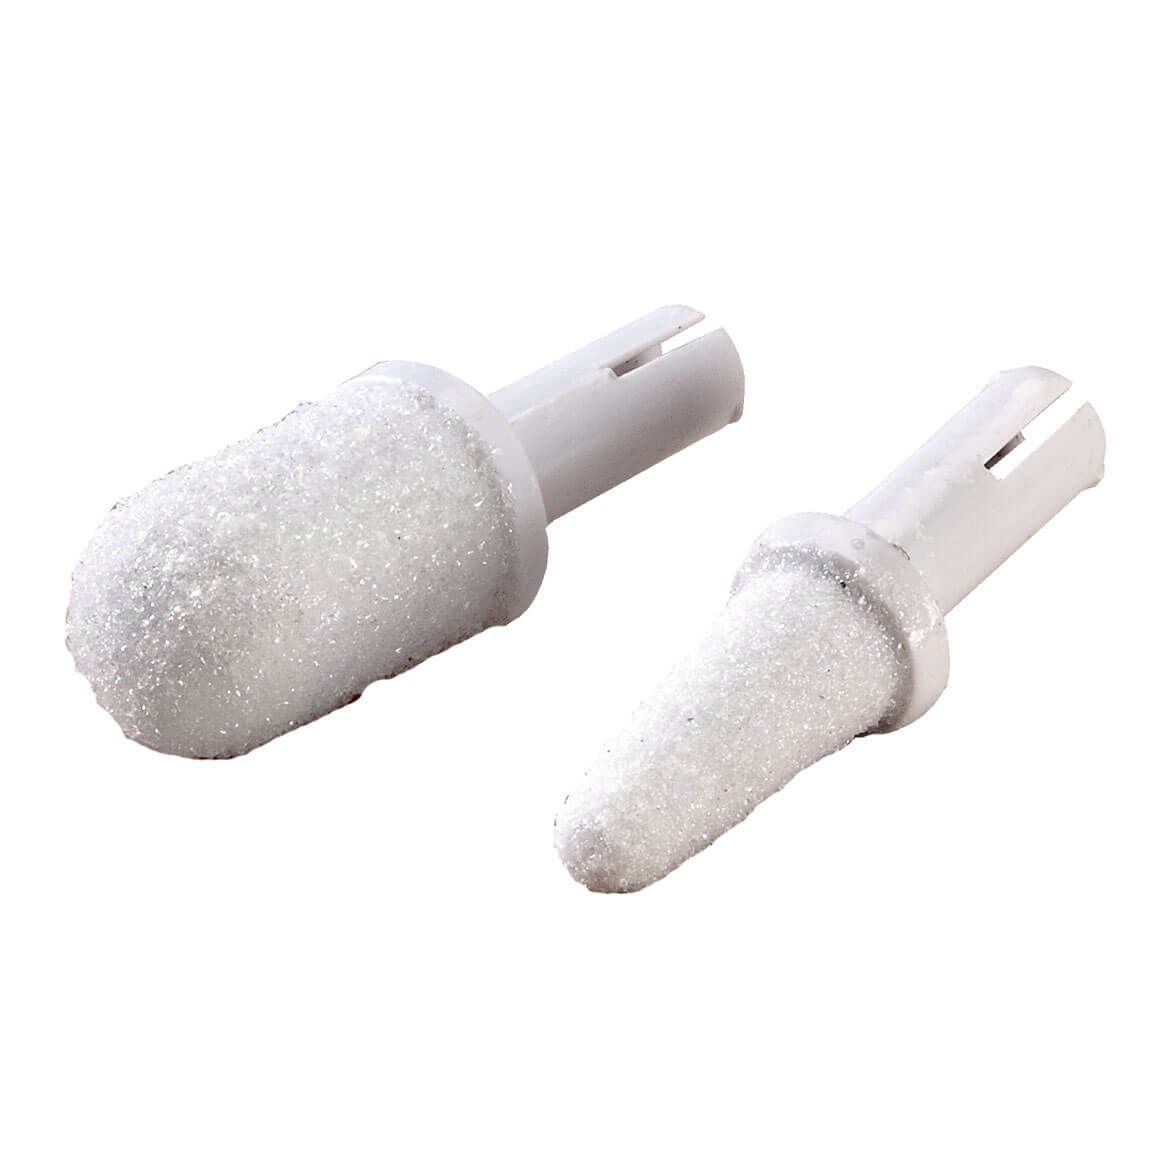 Automatic Nail File Replacement Heads Set of 2 + '-' + 349639